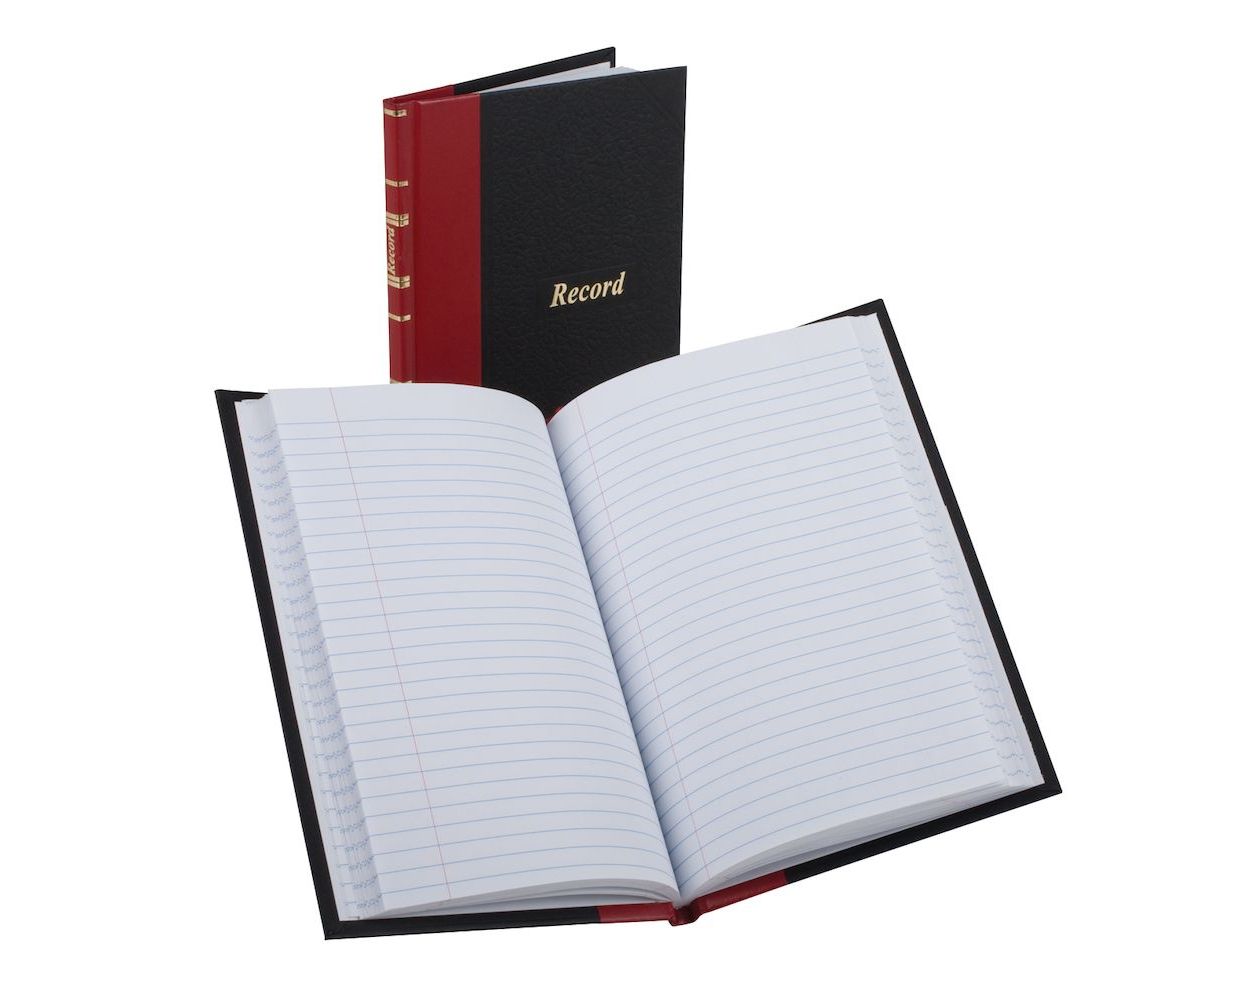 Boorum & Pease® Account Book, Gold Line Series Record-Ruled, 5" x 7-1/2", 144 Pages BOR96304EE-BULK